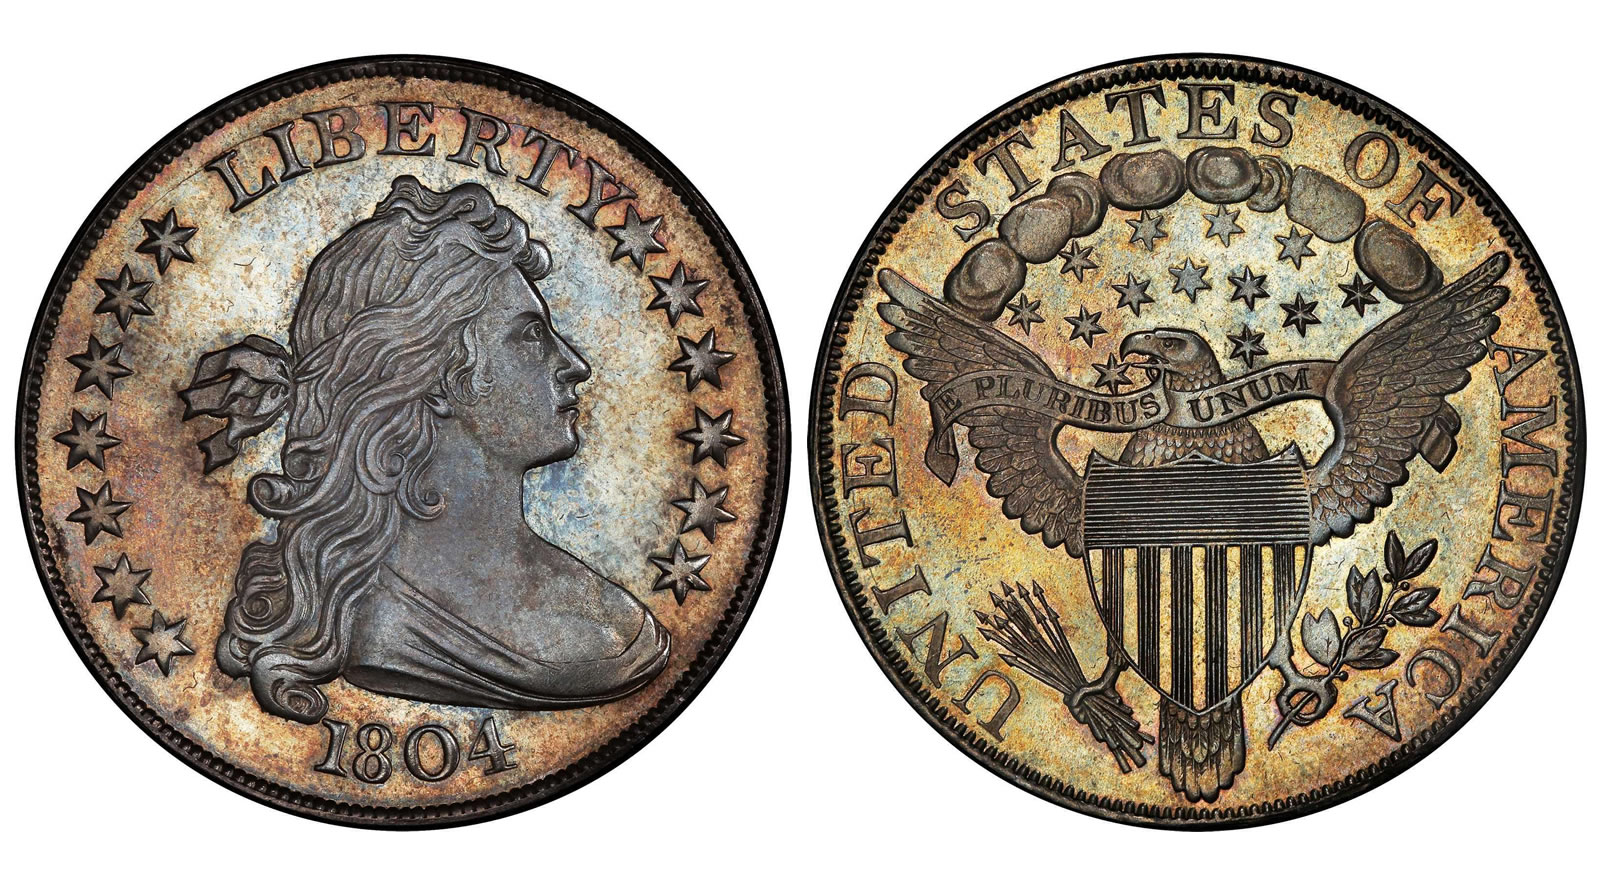 A Rare 1804 Silver Dollar Just Sold for Record-Breaking $7.68